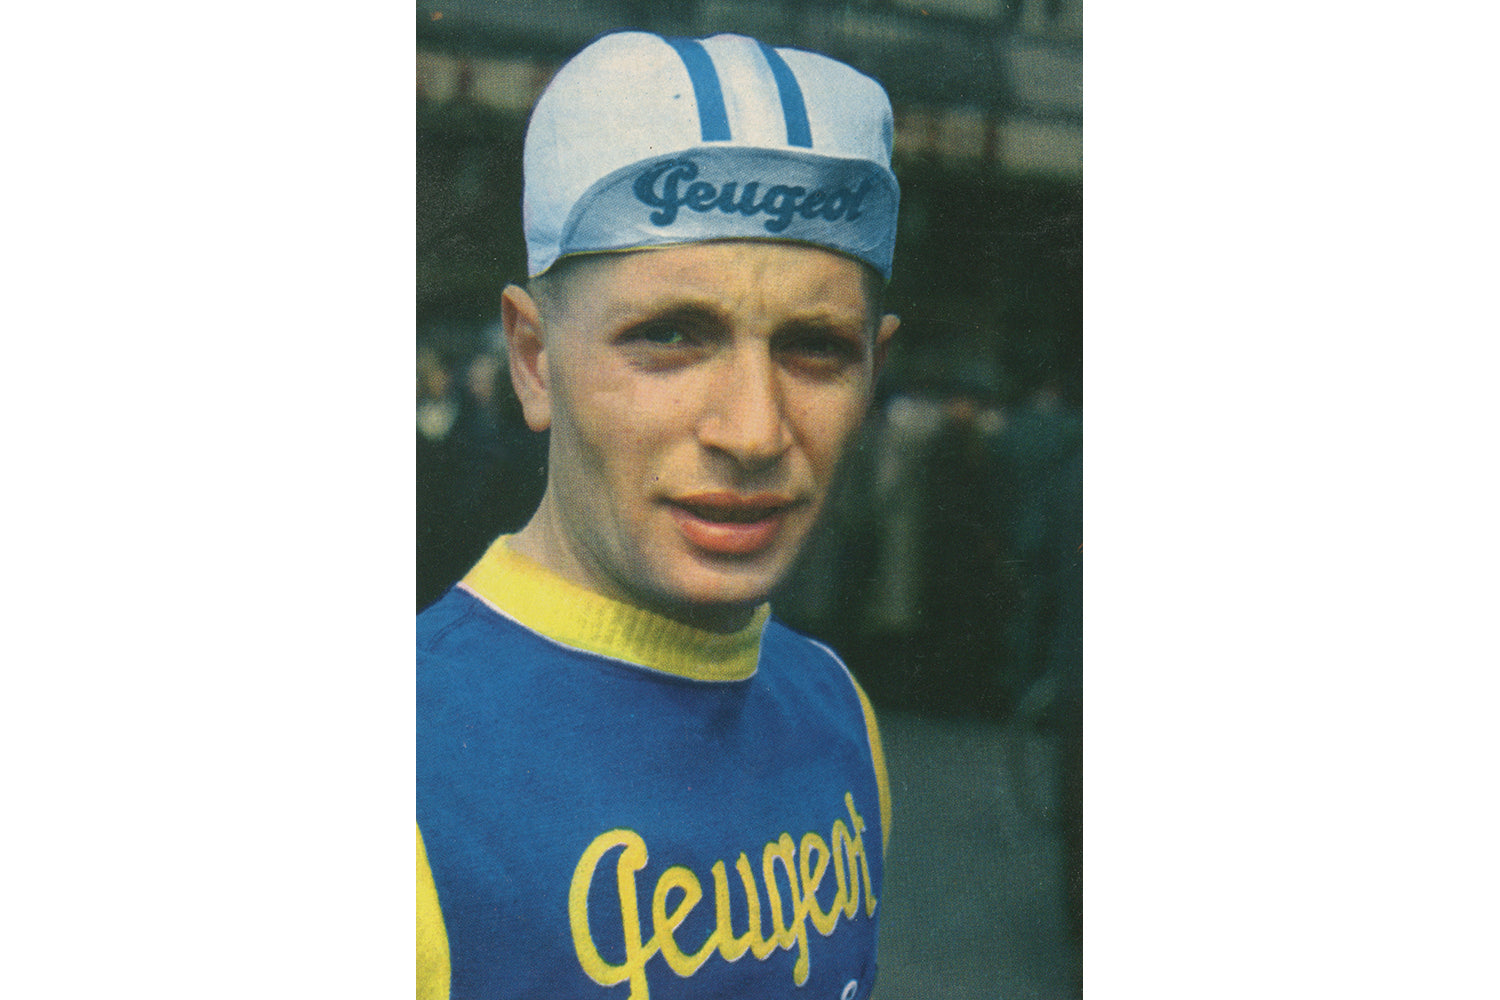 Frans Schoubben wearing the 1962 version of the Peugeot BP cycling team jersey.